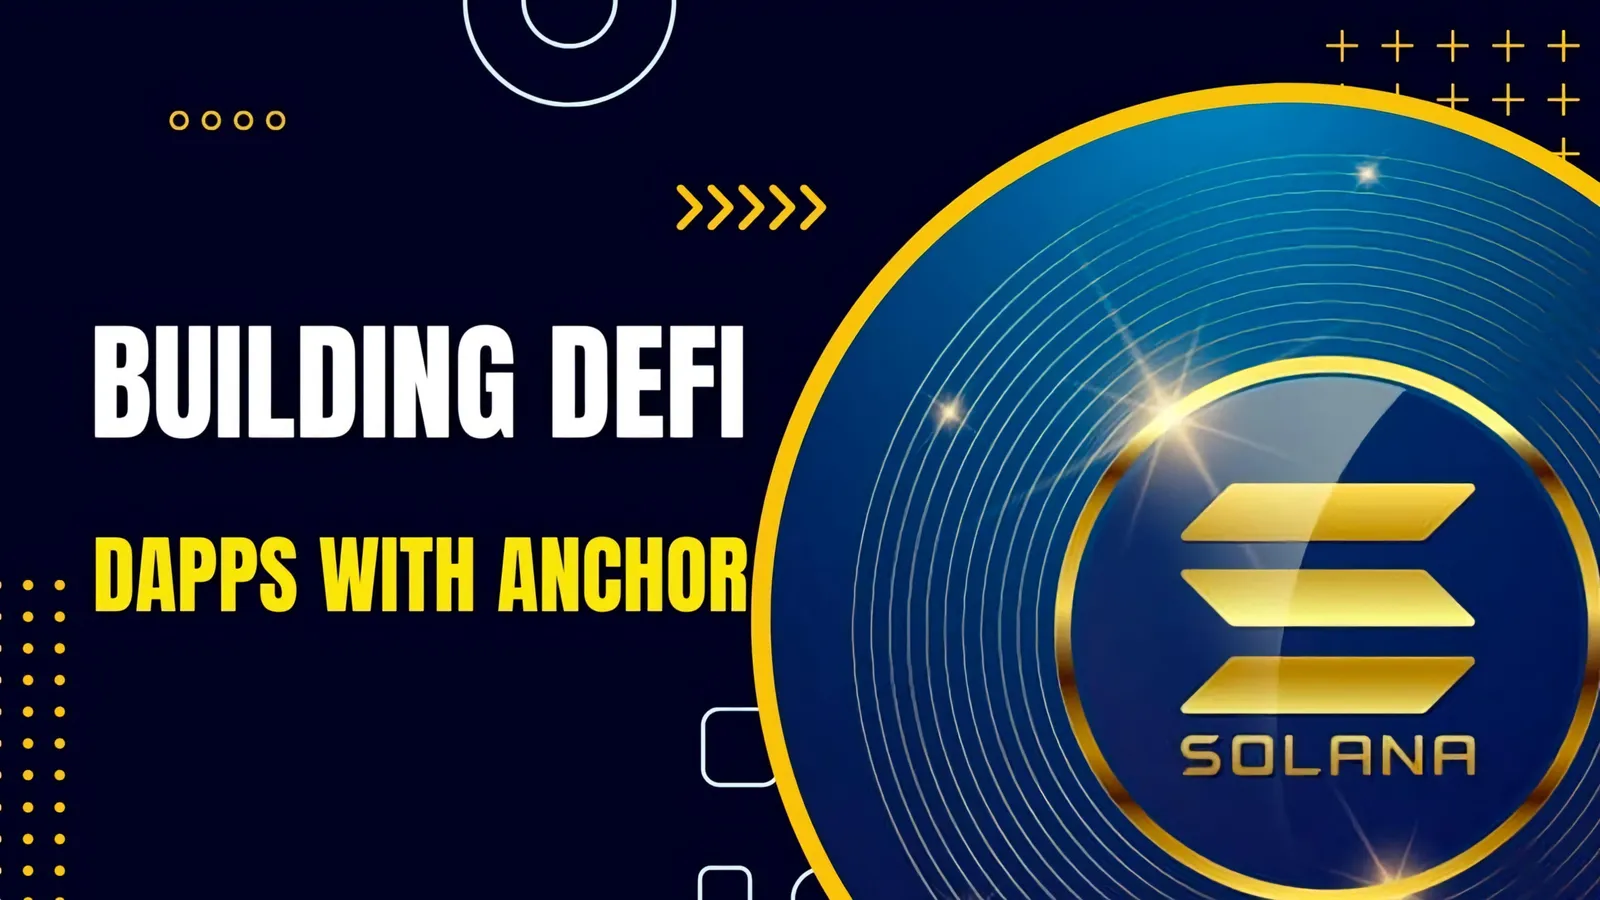 Building DeFi Dapps with Anchor